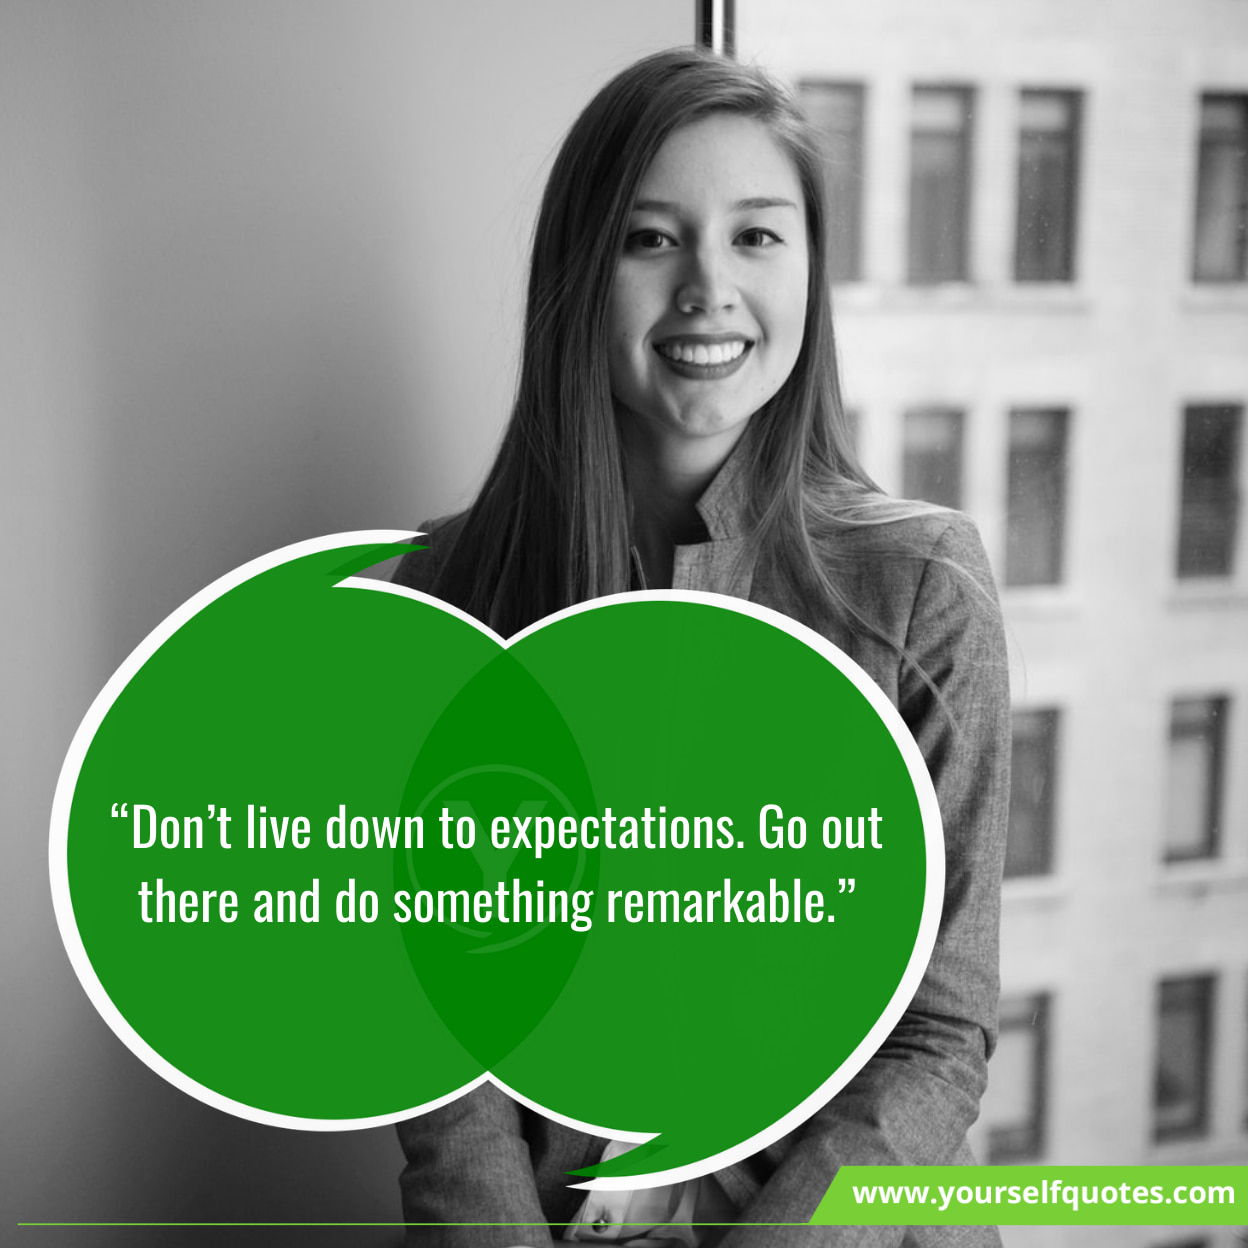 “Don’t live down to expectations. Go out there and do something remarkable.”